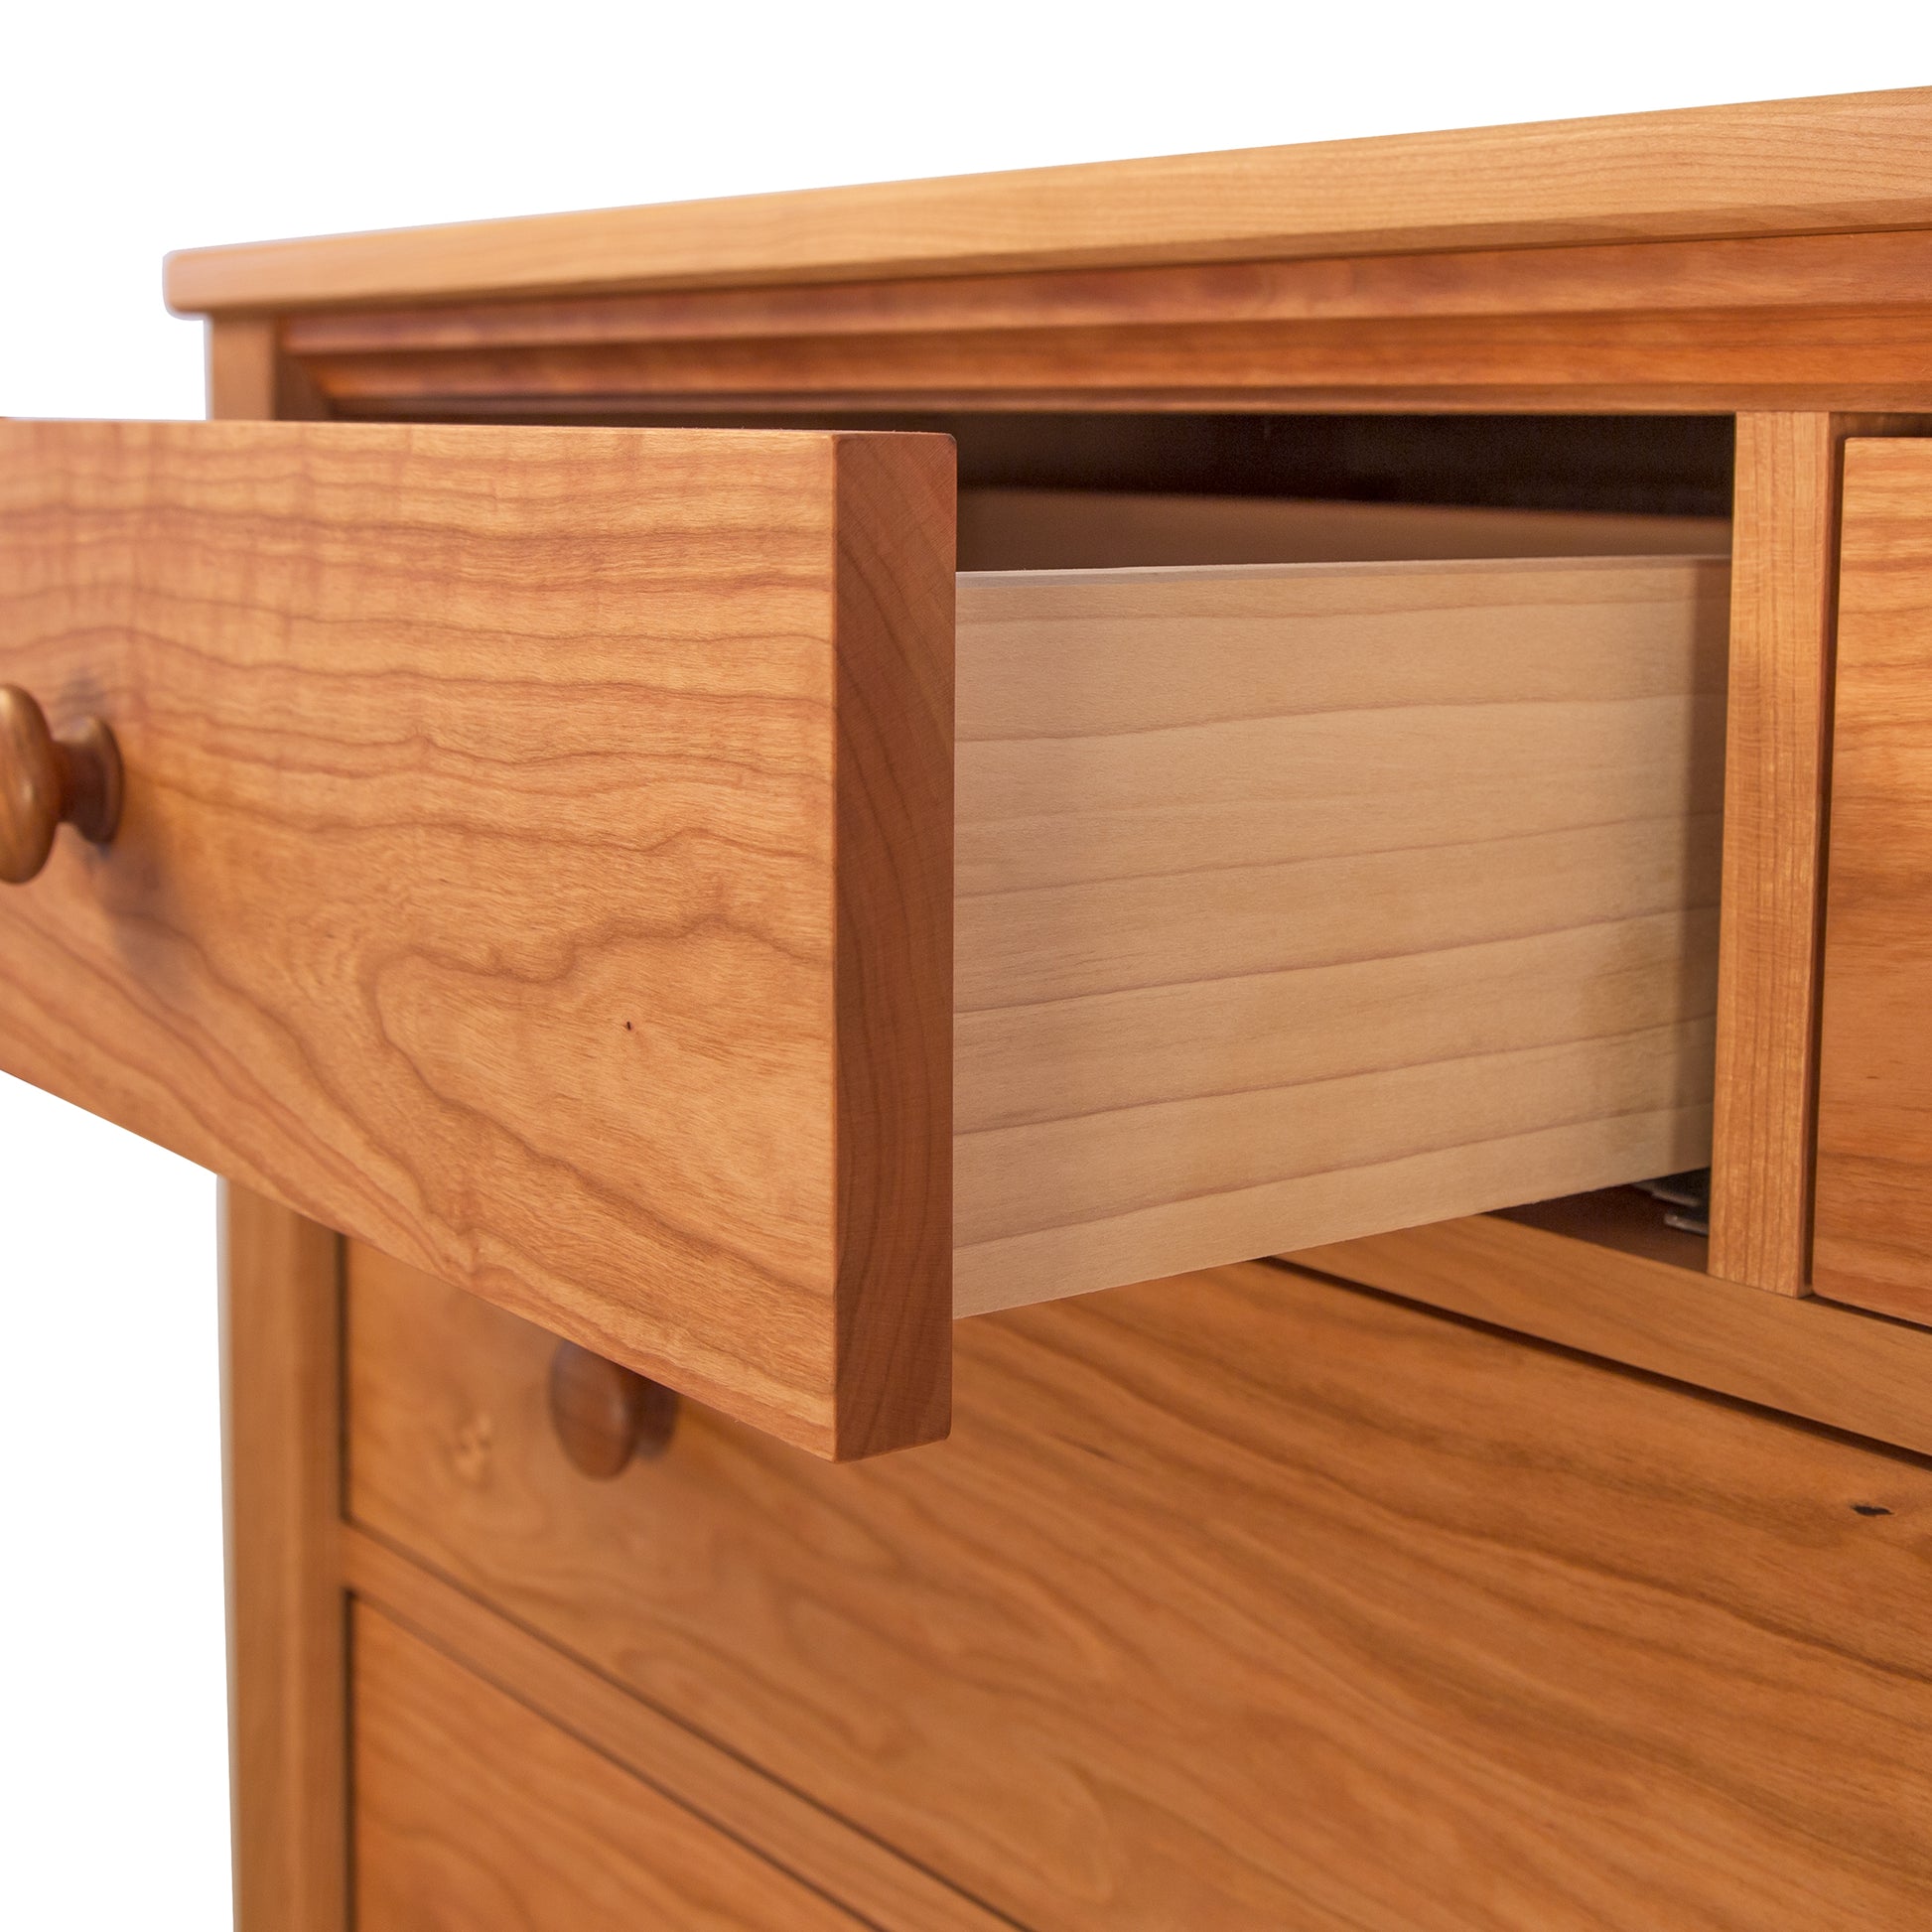 An open drawer of a Vermont Shaker Extra Wide Chest from Maple Corner Woodworks, highlighting the grain and craftsmanship. The drawer is partially extended, showcasing its construction and smooth interior.